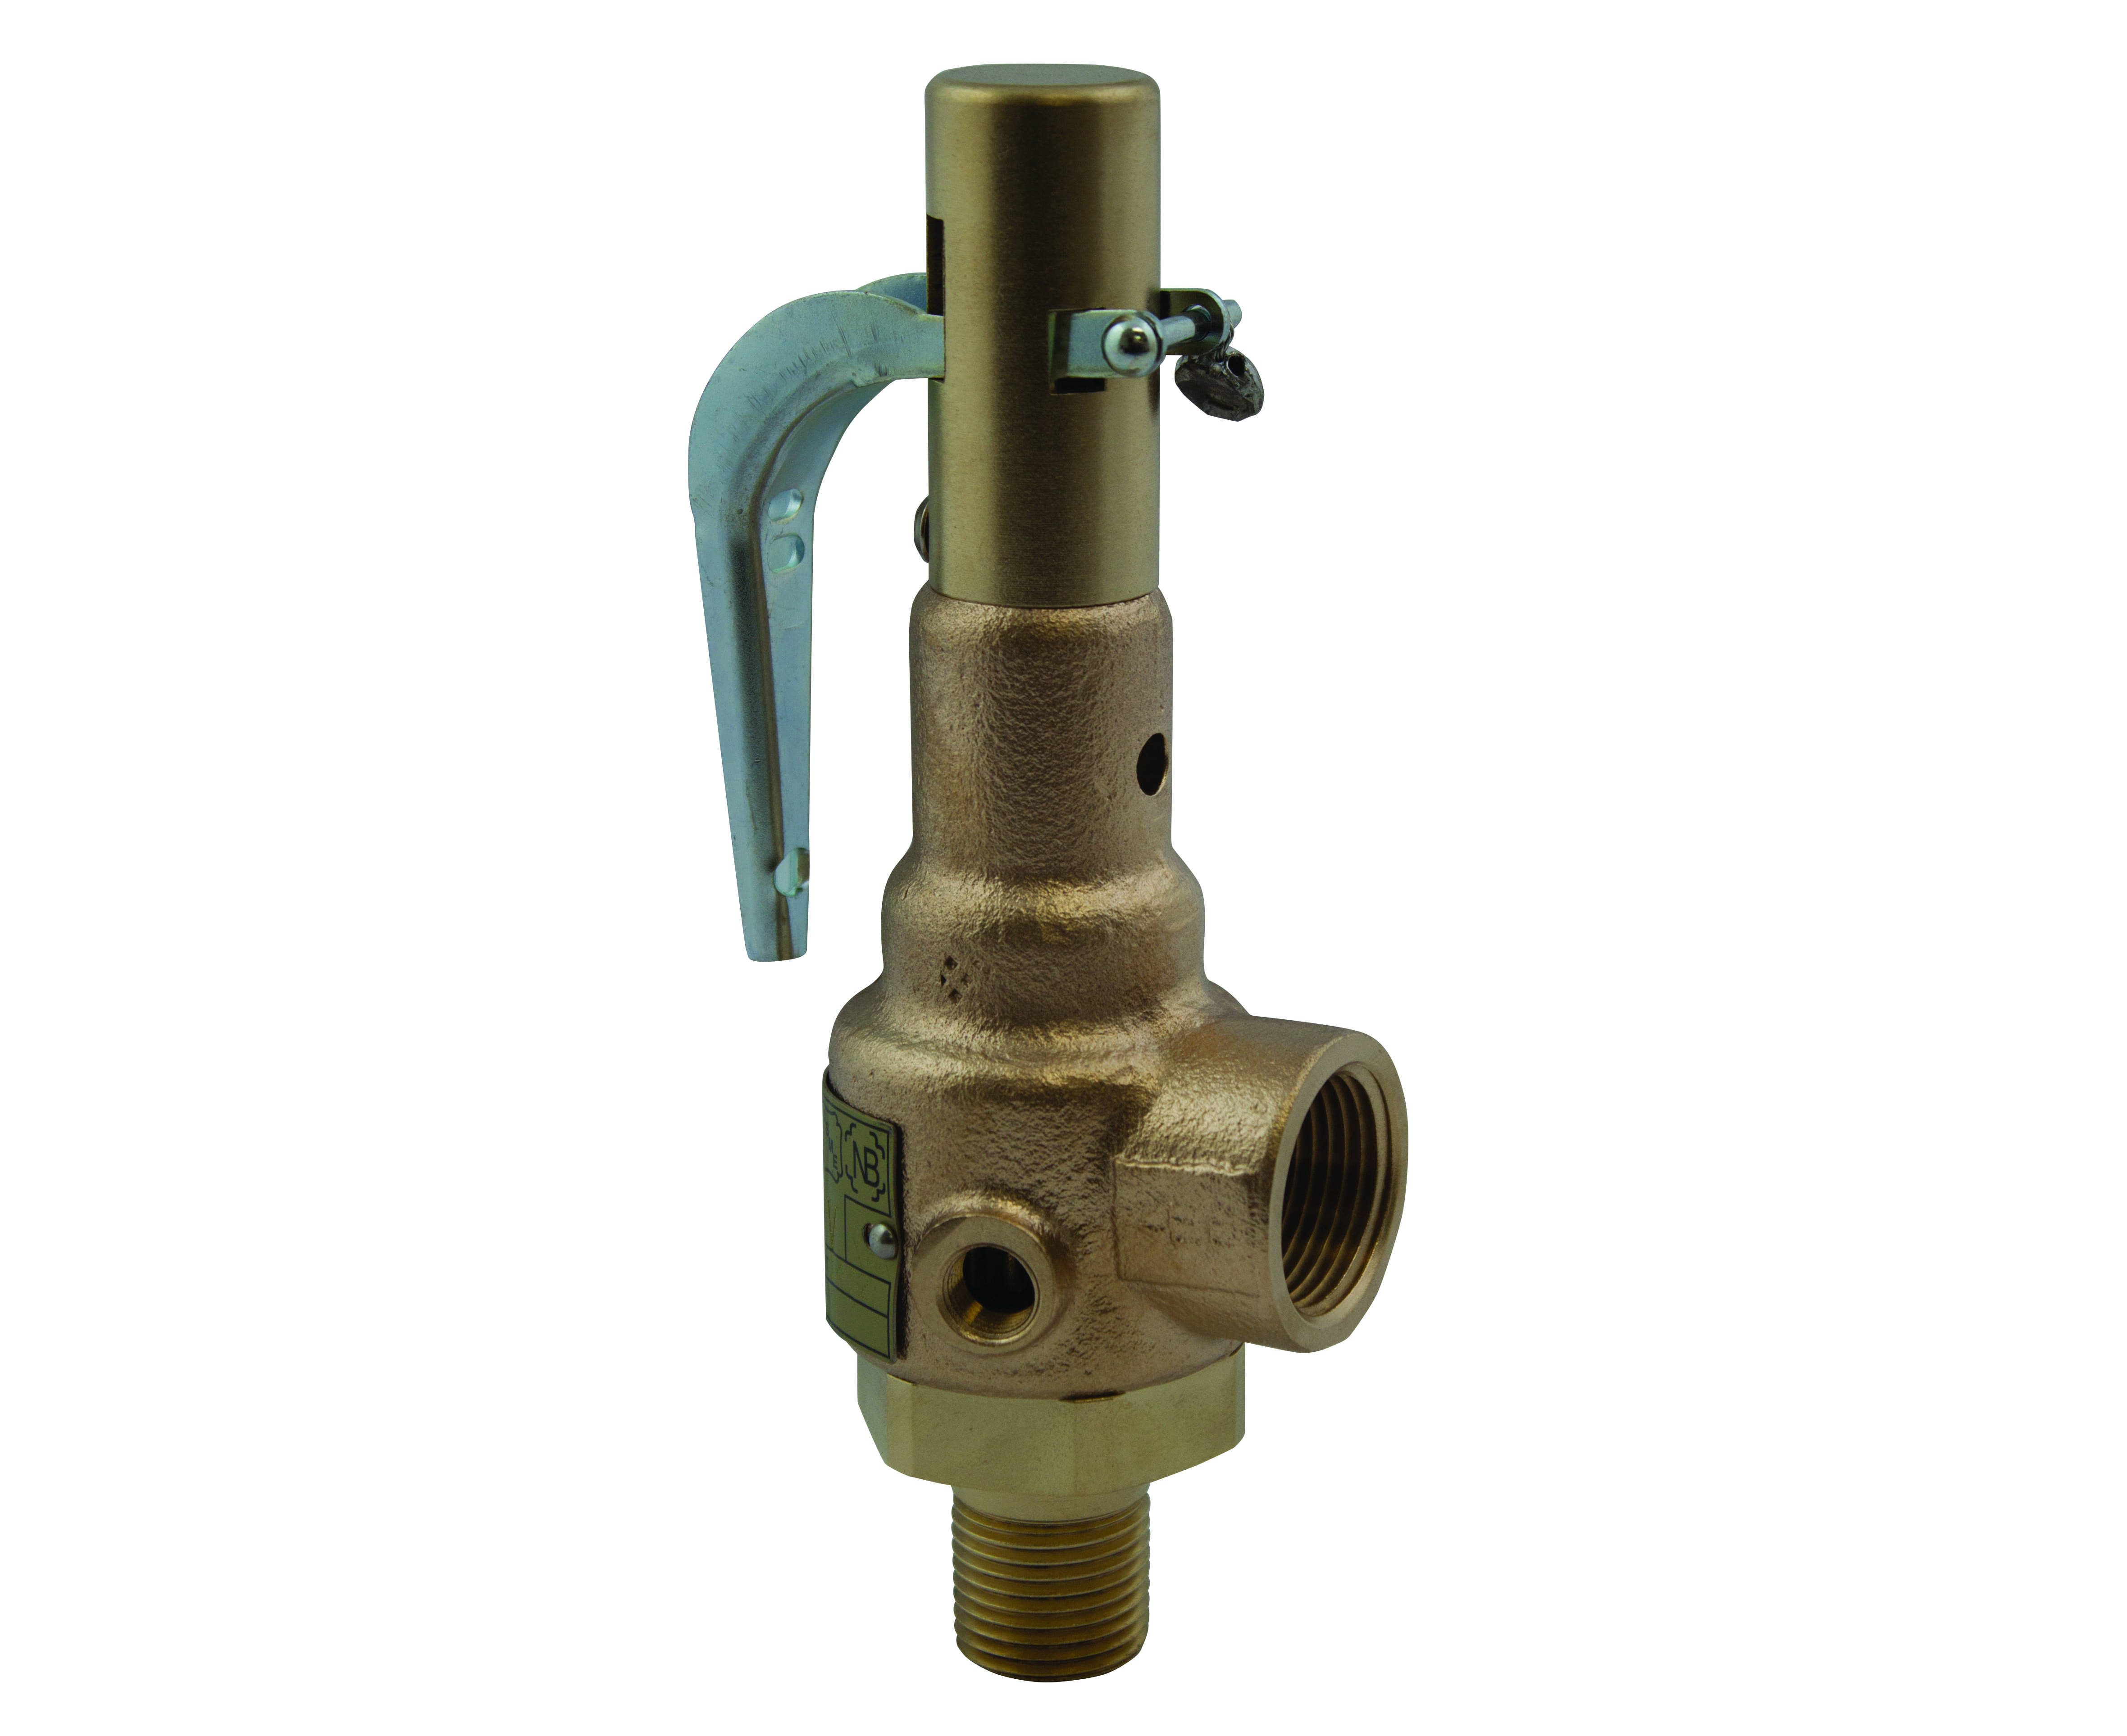 Preview image for Apollo ASME Sec VIII Air Bronze Safety Relief Valves with Brass Trim, Teflon Seat, CE/PED Compliant, 1-1/4" x 1-1/2" (MNPT x FNPT)